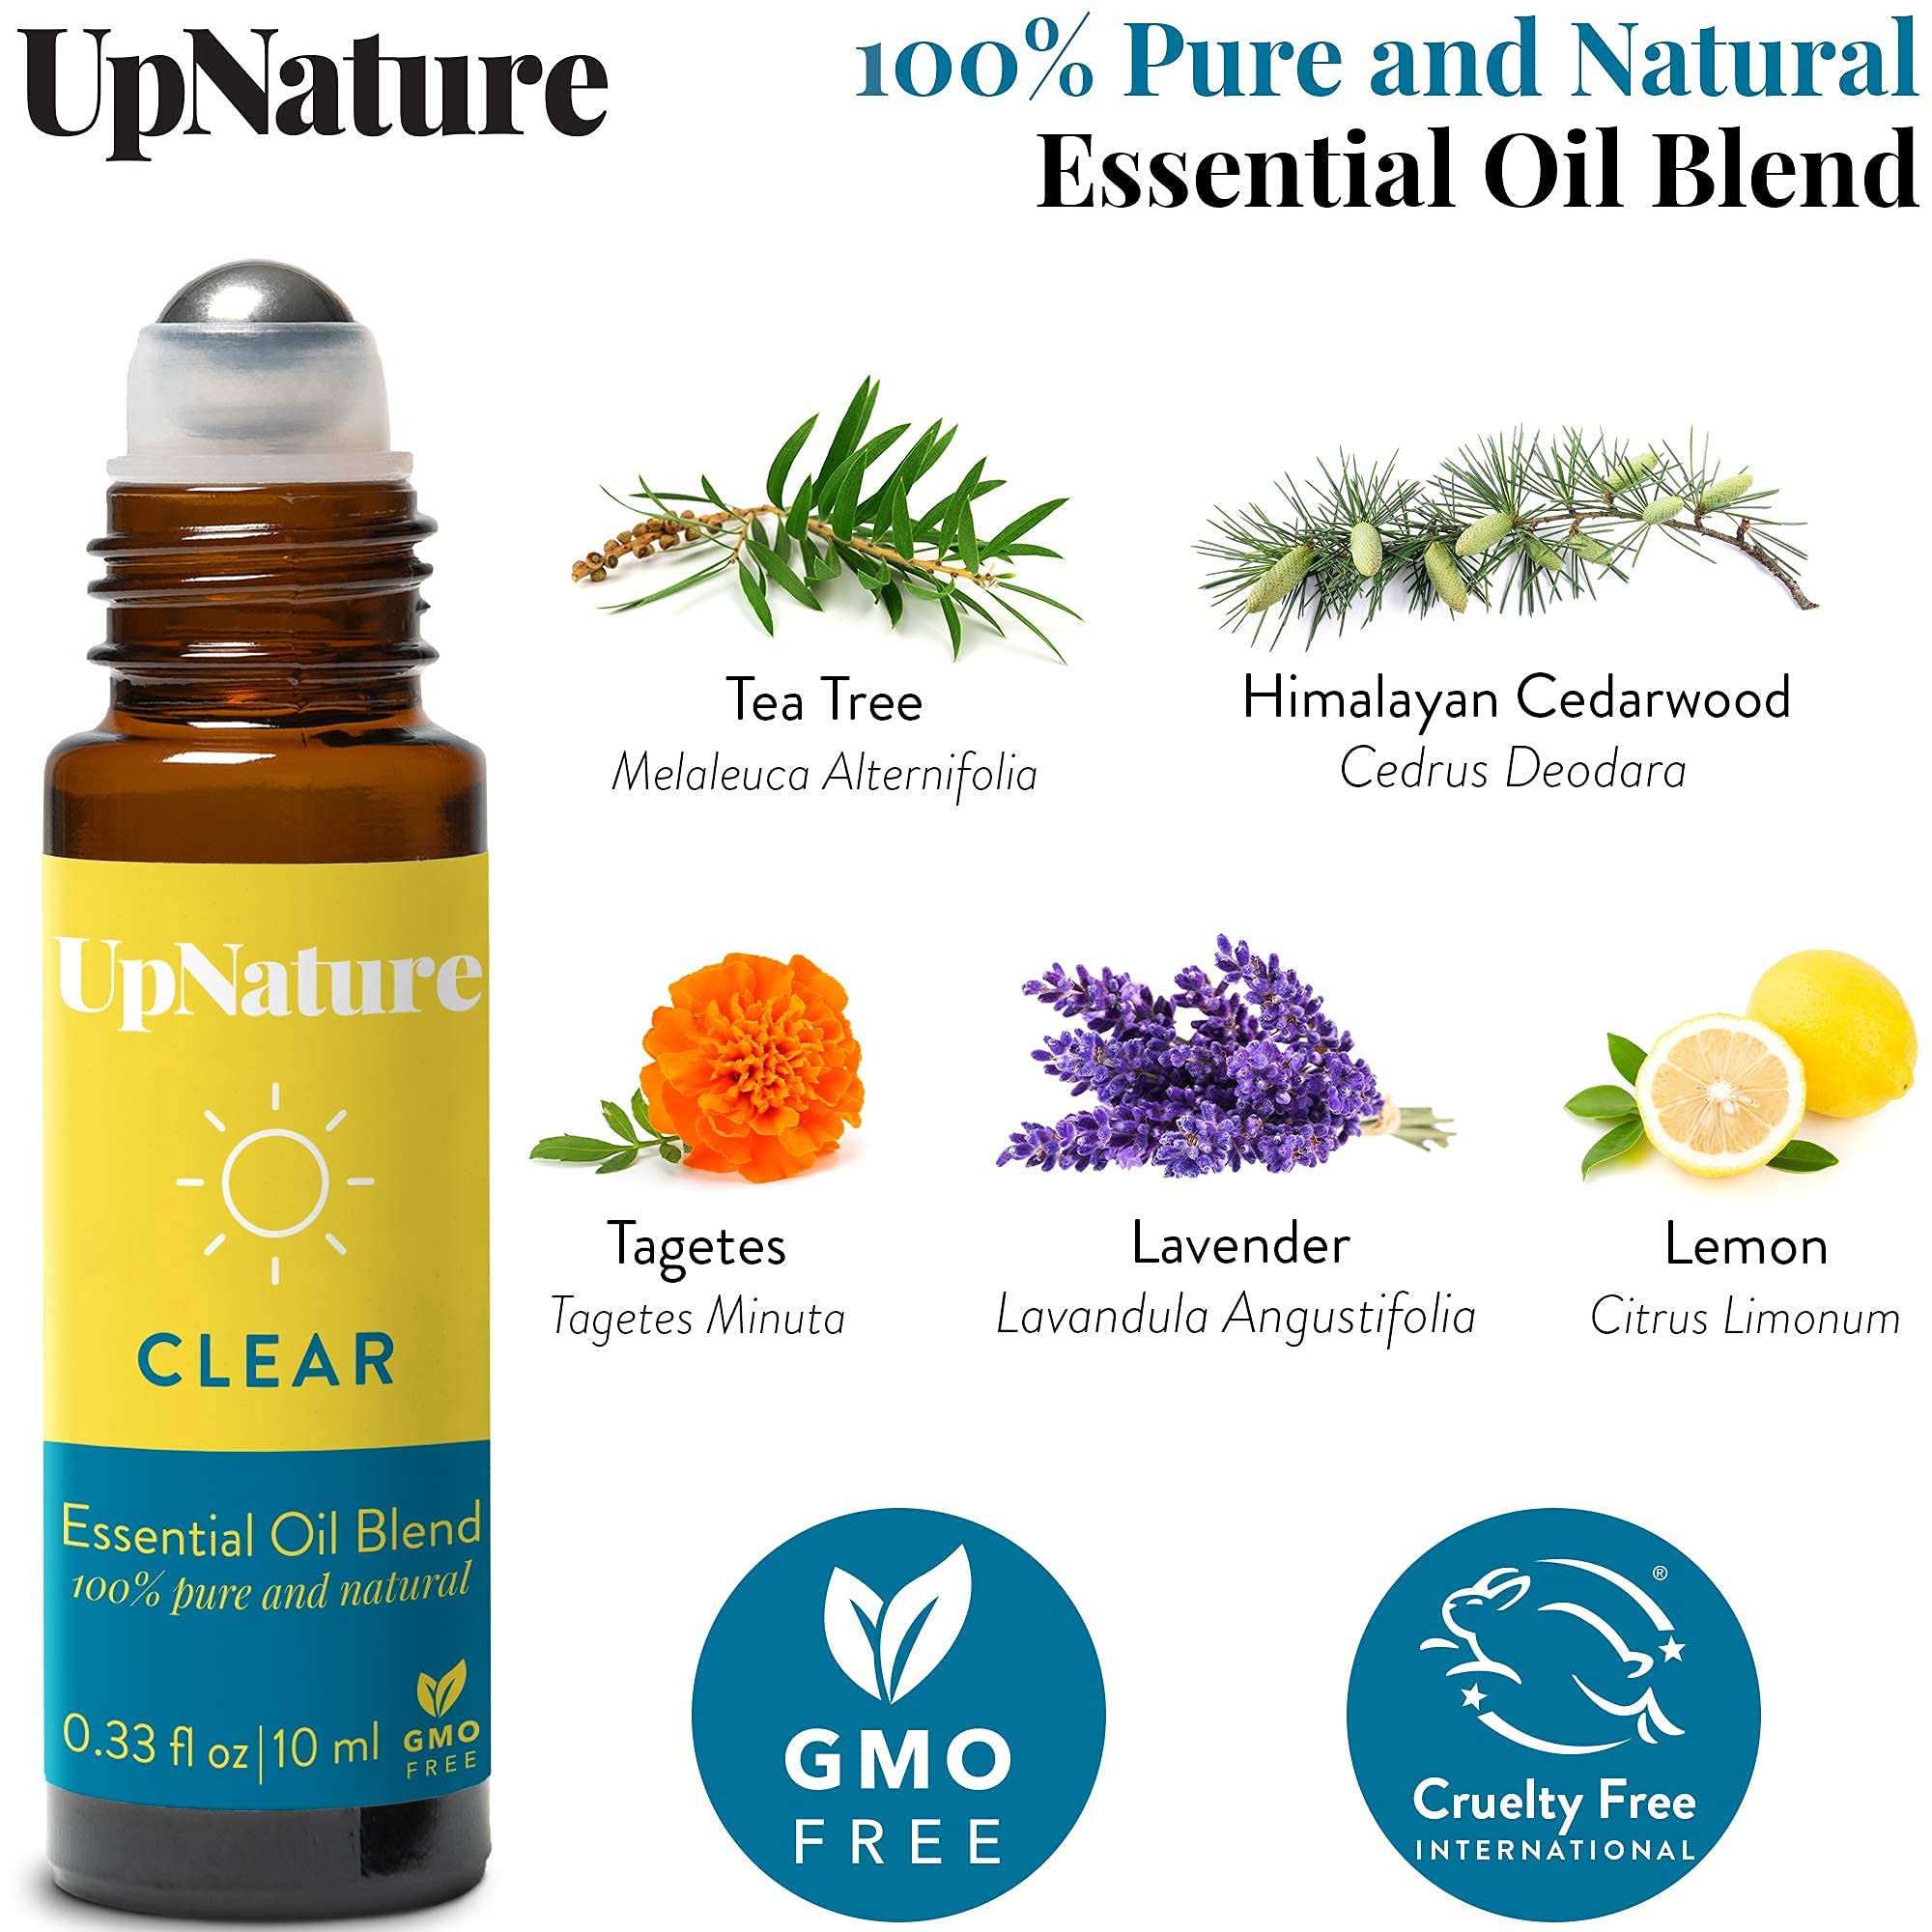 Clear Essential Oil Roll On Blend - Nail & Toenail Treatment - Therapeutic Grade Pure Tea Tree Oil, Lavender & Cedarwood Essential Oil - Easy Application Nail Treatment, gift under 10 dollars